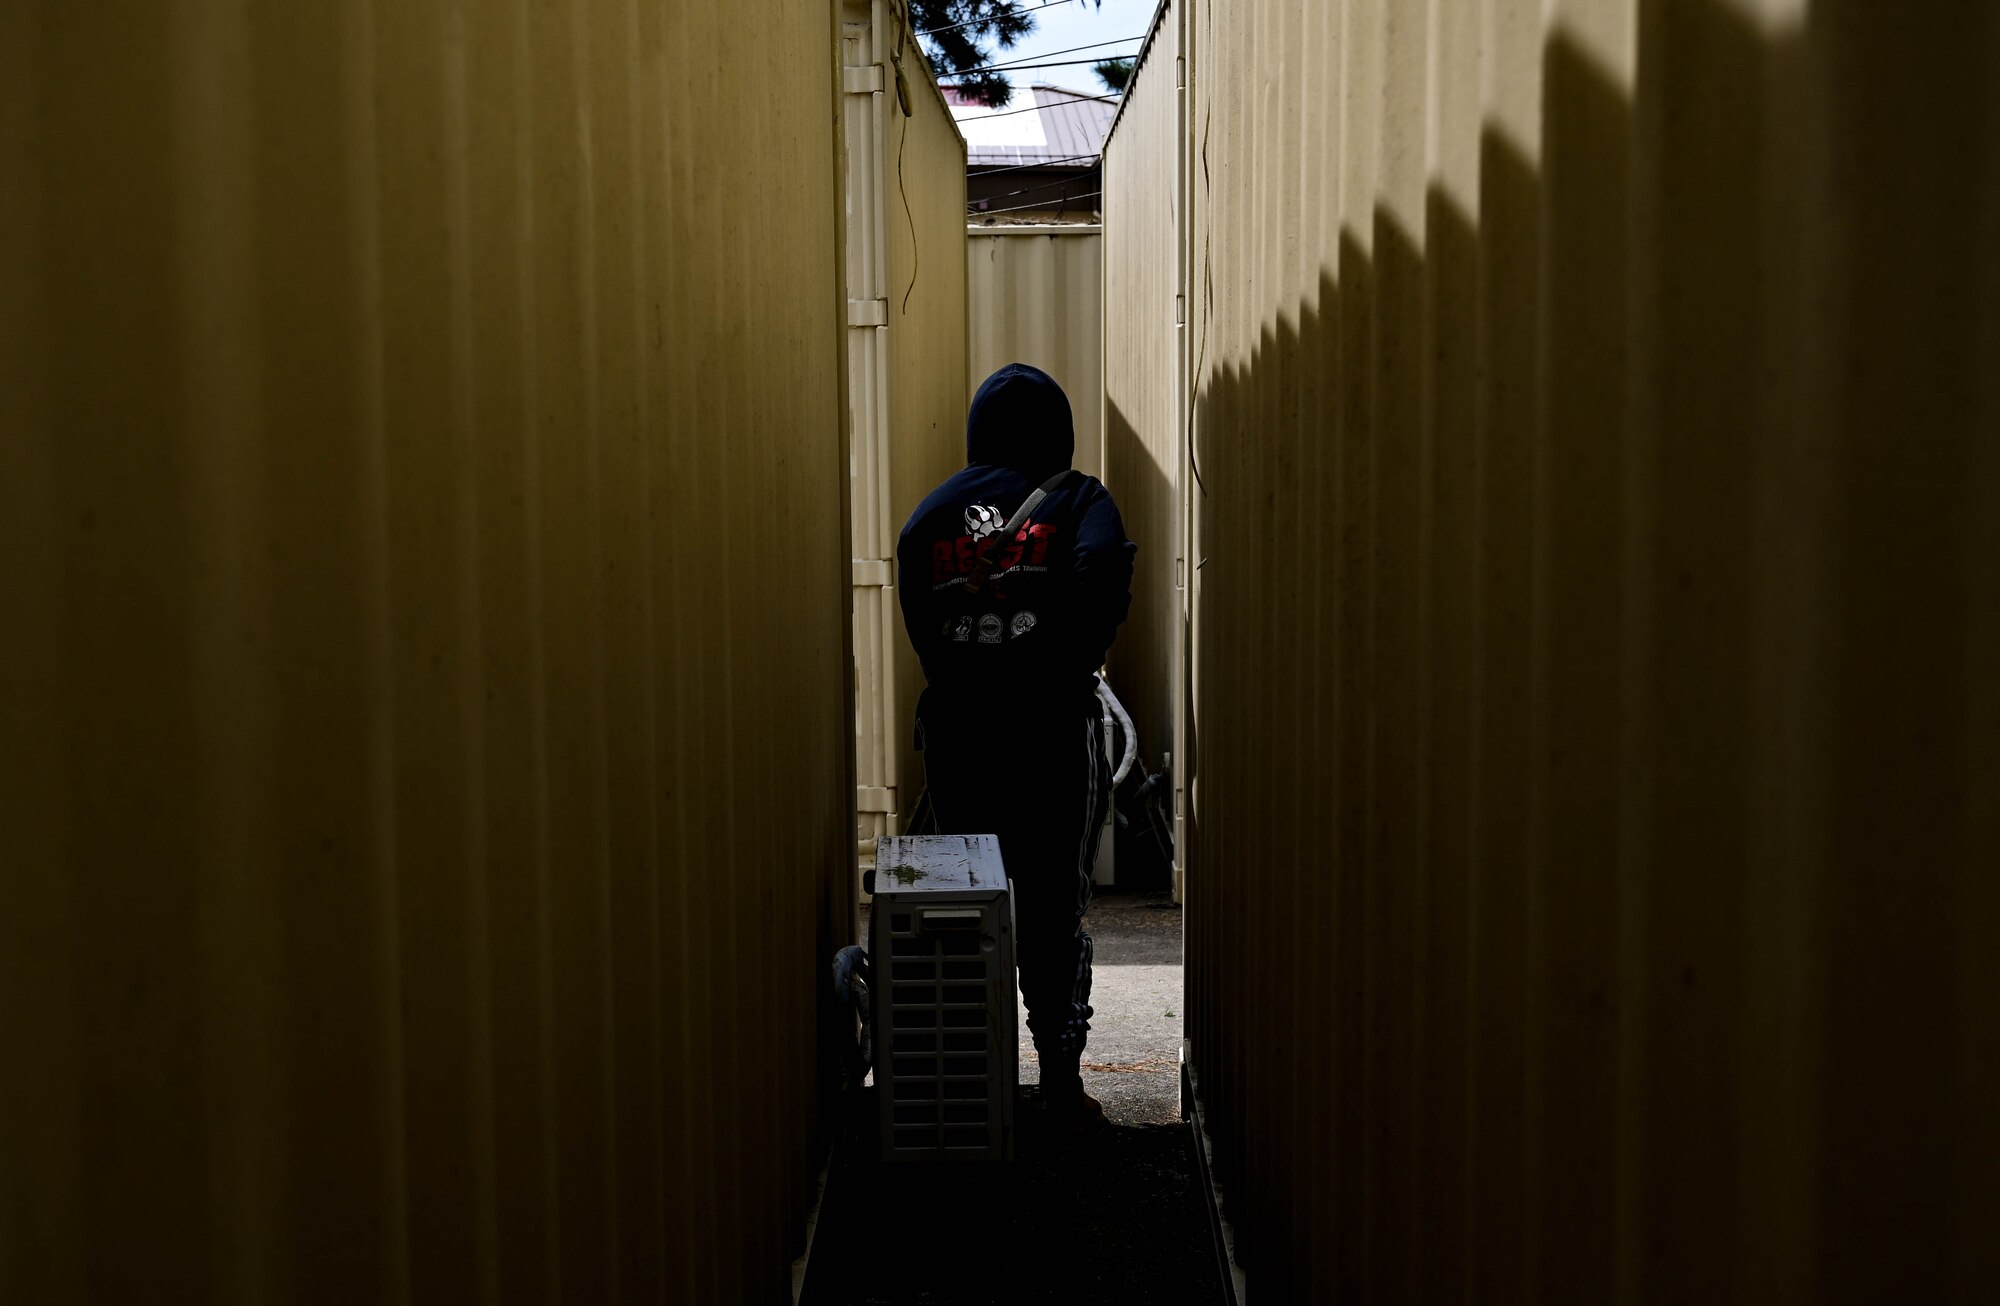 Airman dressed as civilian walks between cargo boxes with weapon.